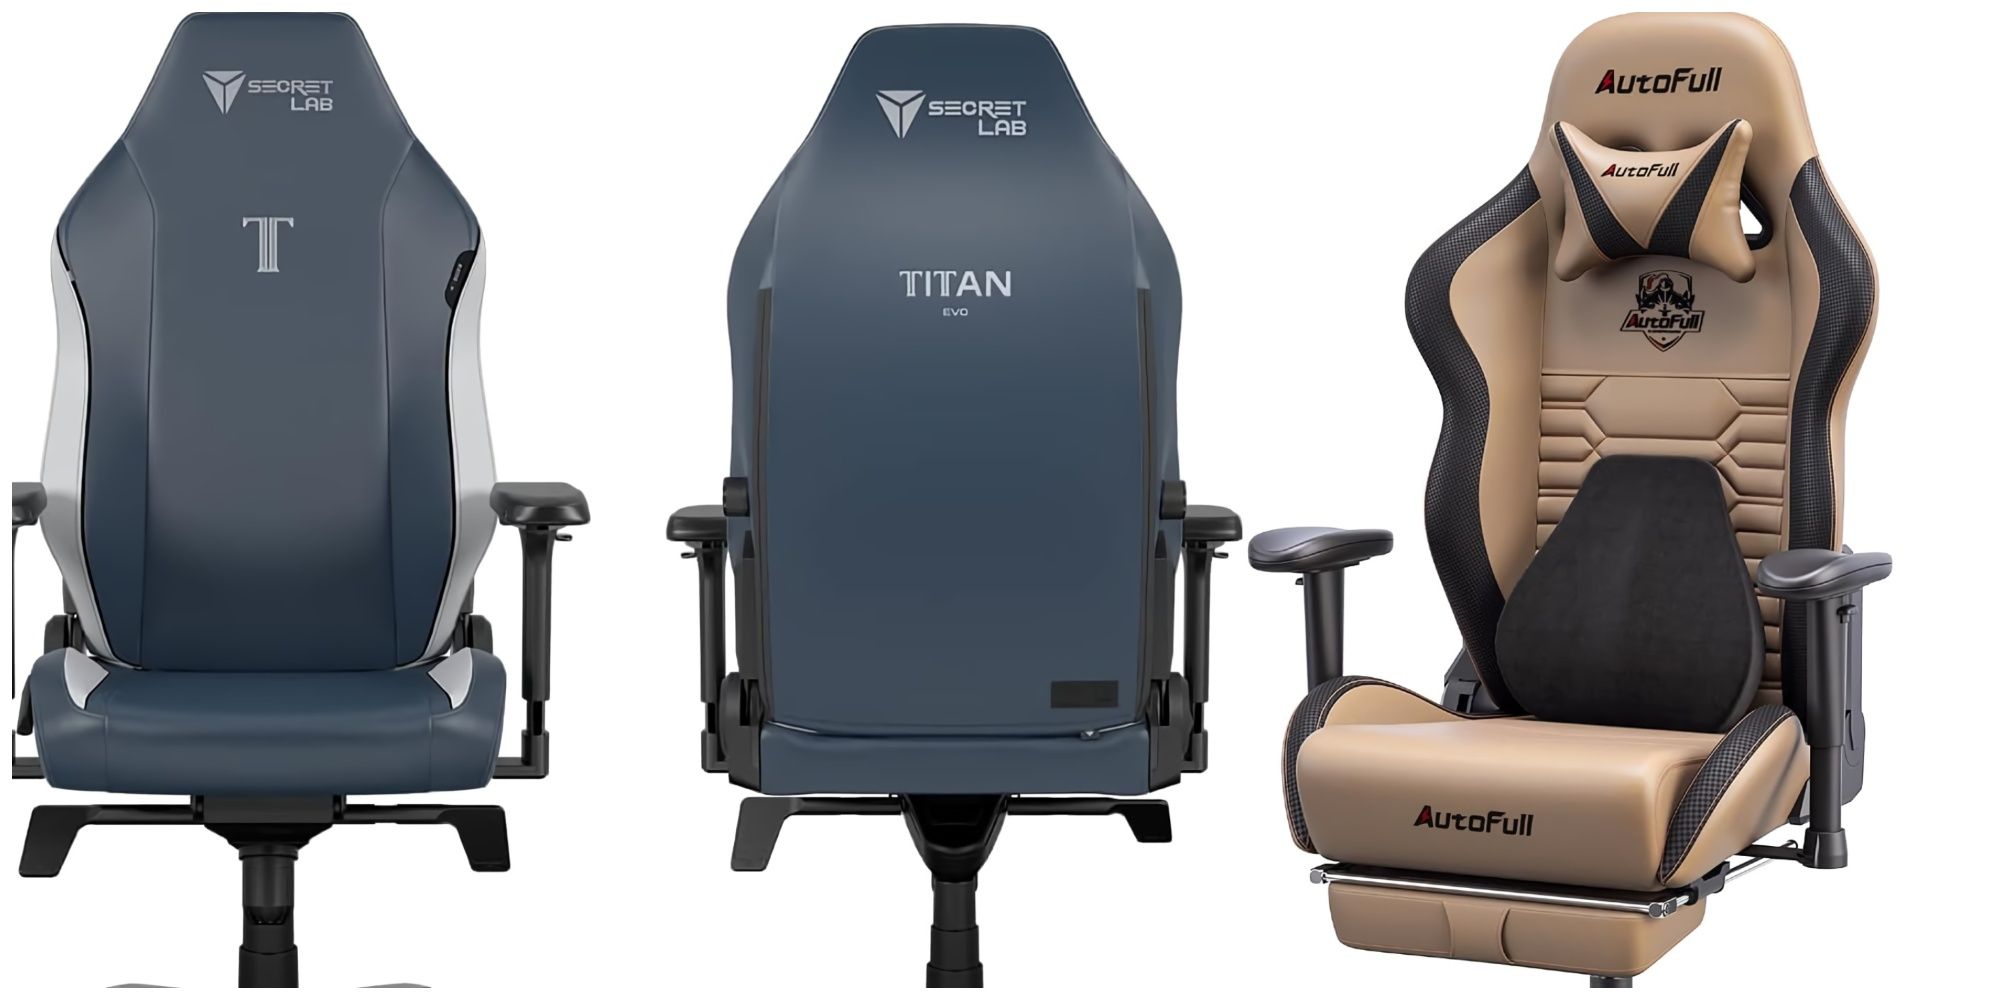 Best gaming chairs 2023: The best options for work and play